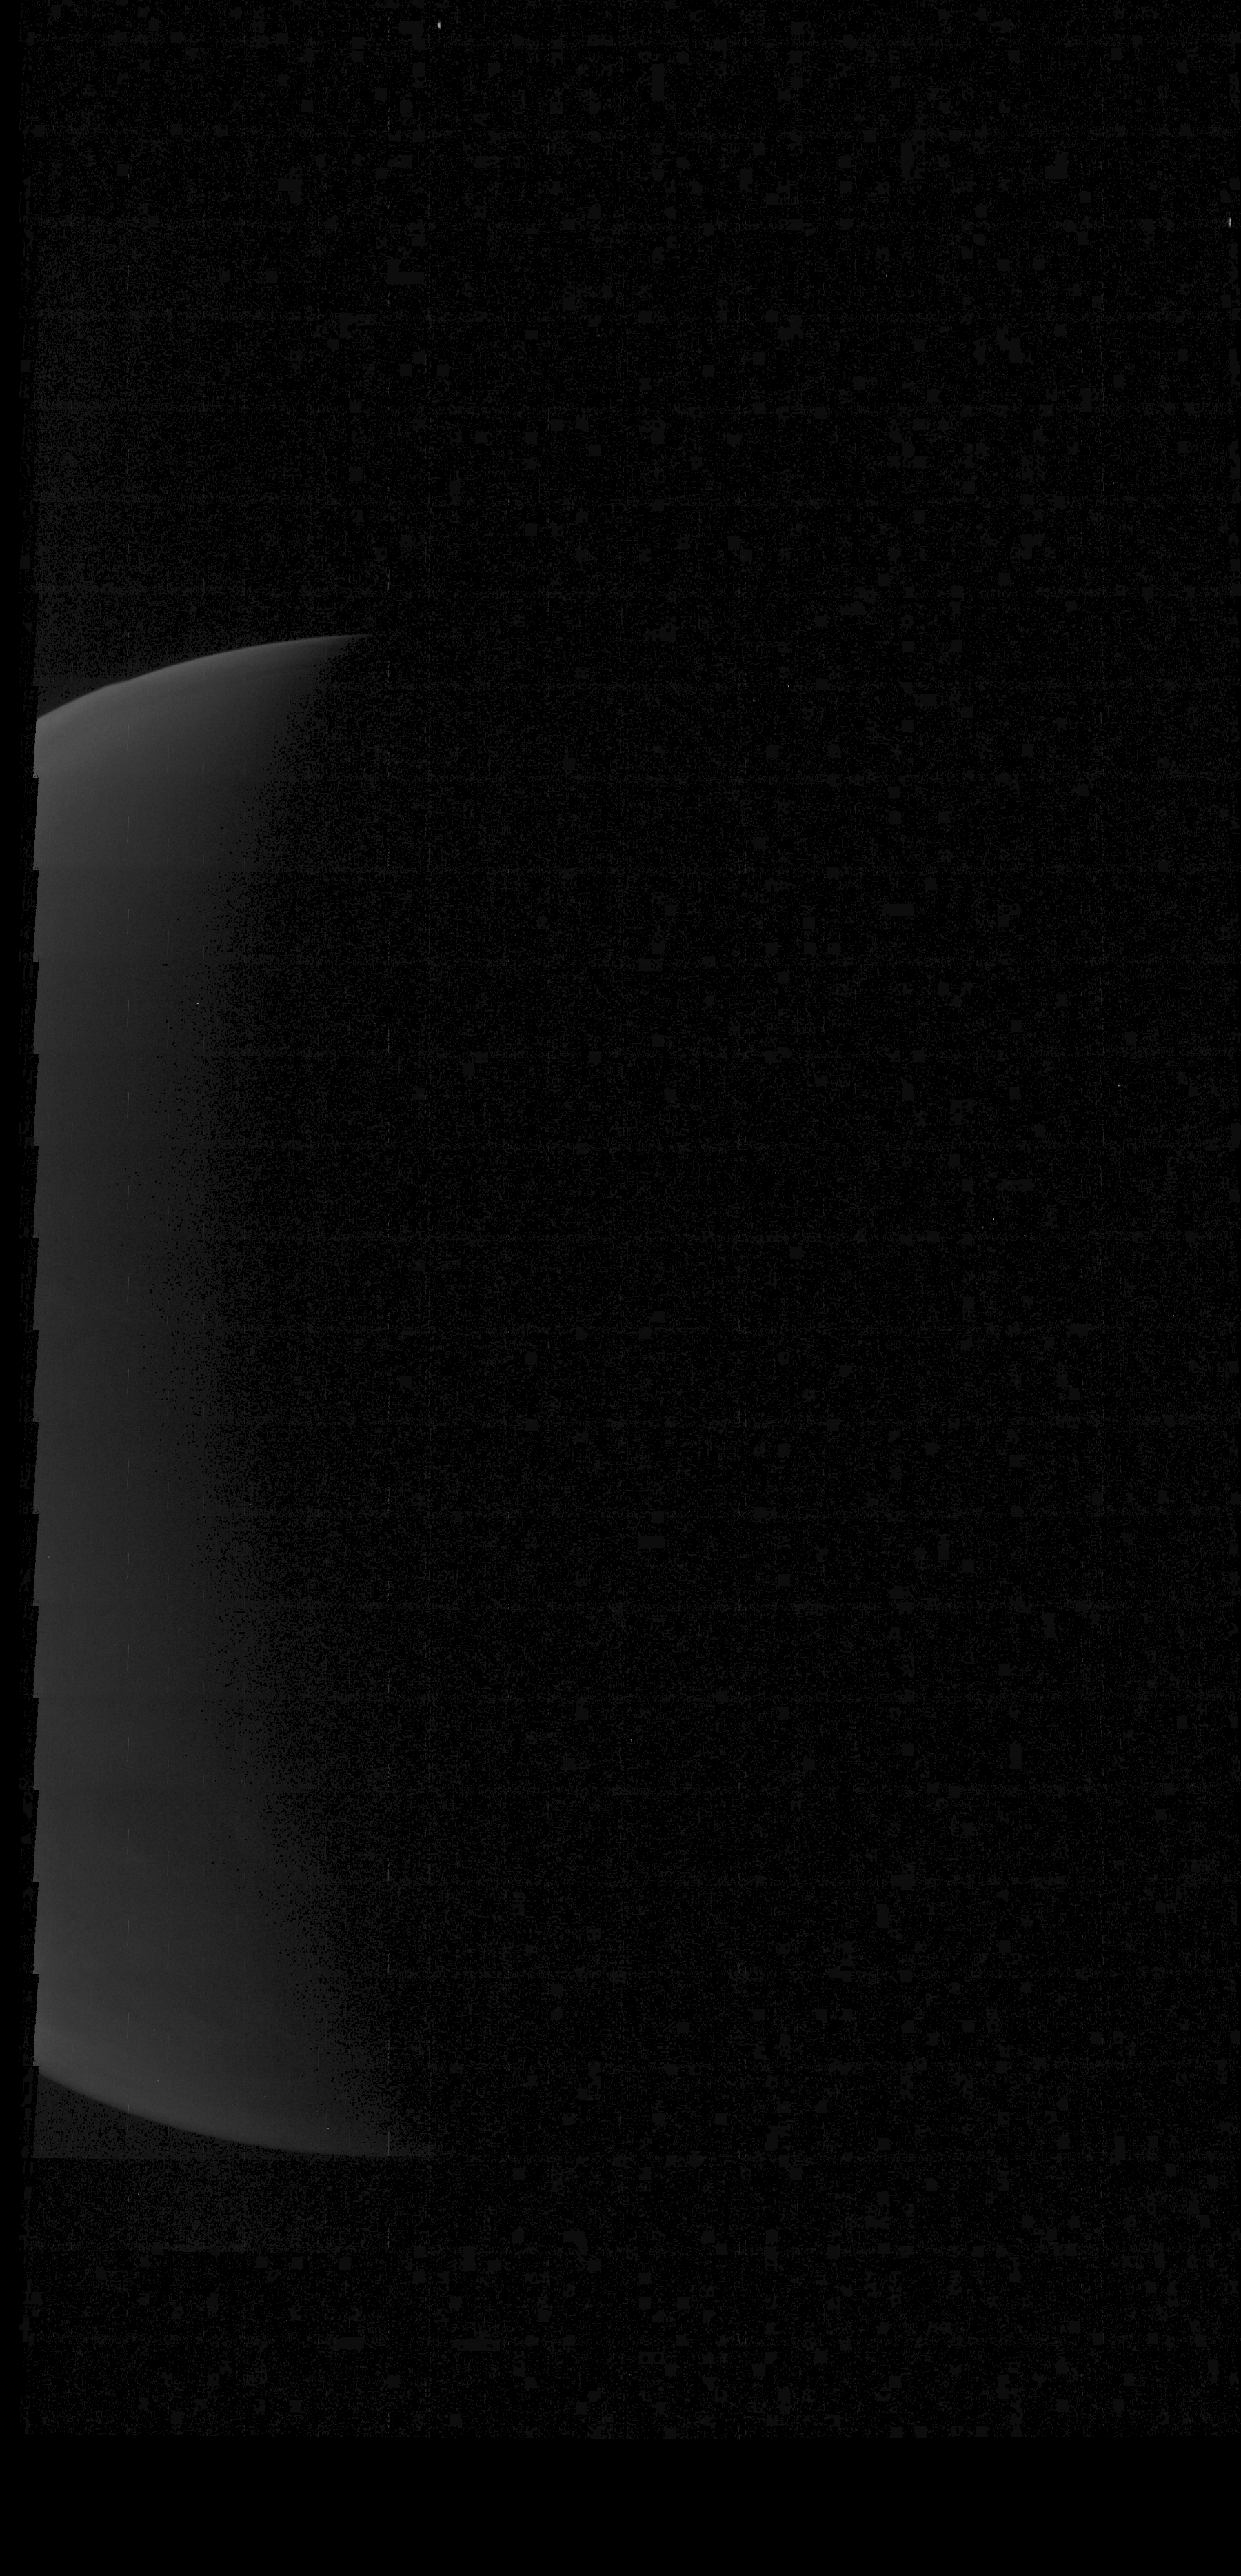 JNCE_2019360_24M00014_V01-raw_proc_hollow_sphere_m_pj_out.BMP_thumbnail_.png